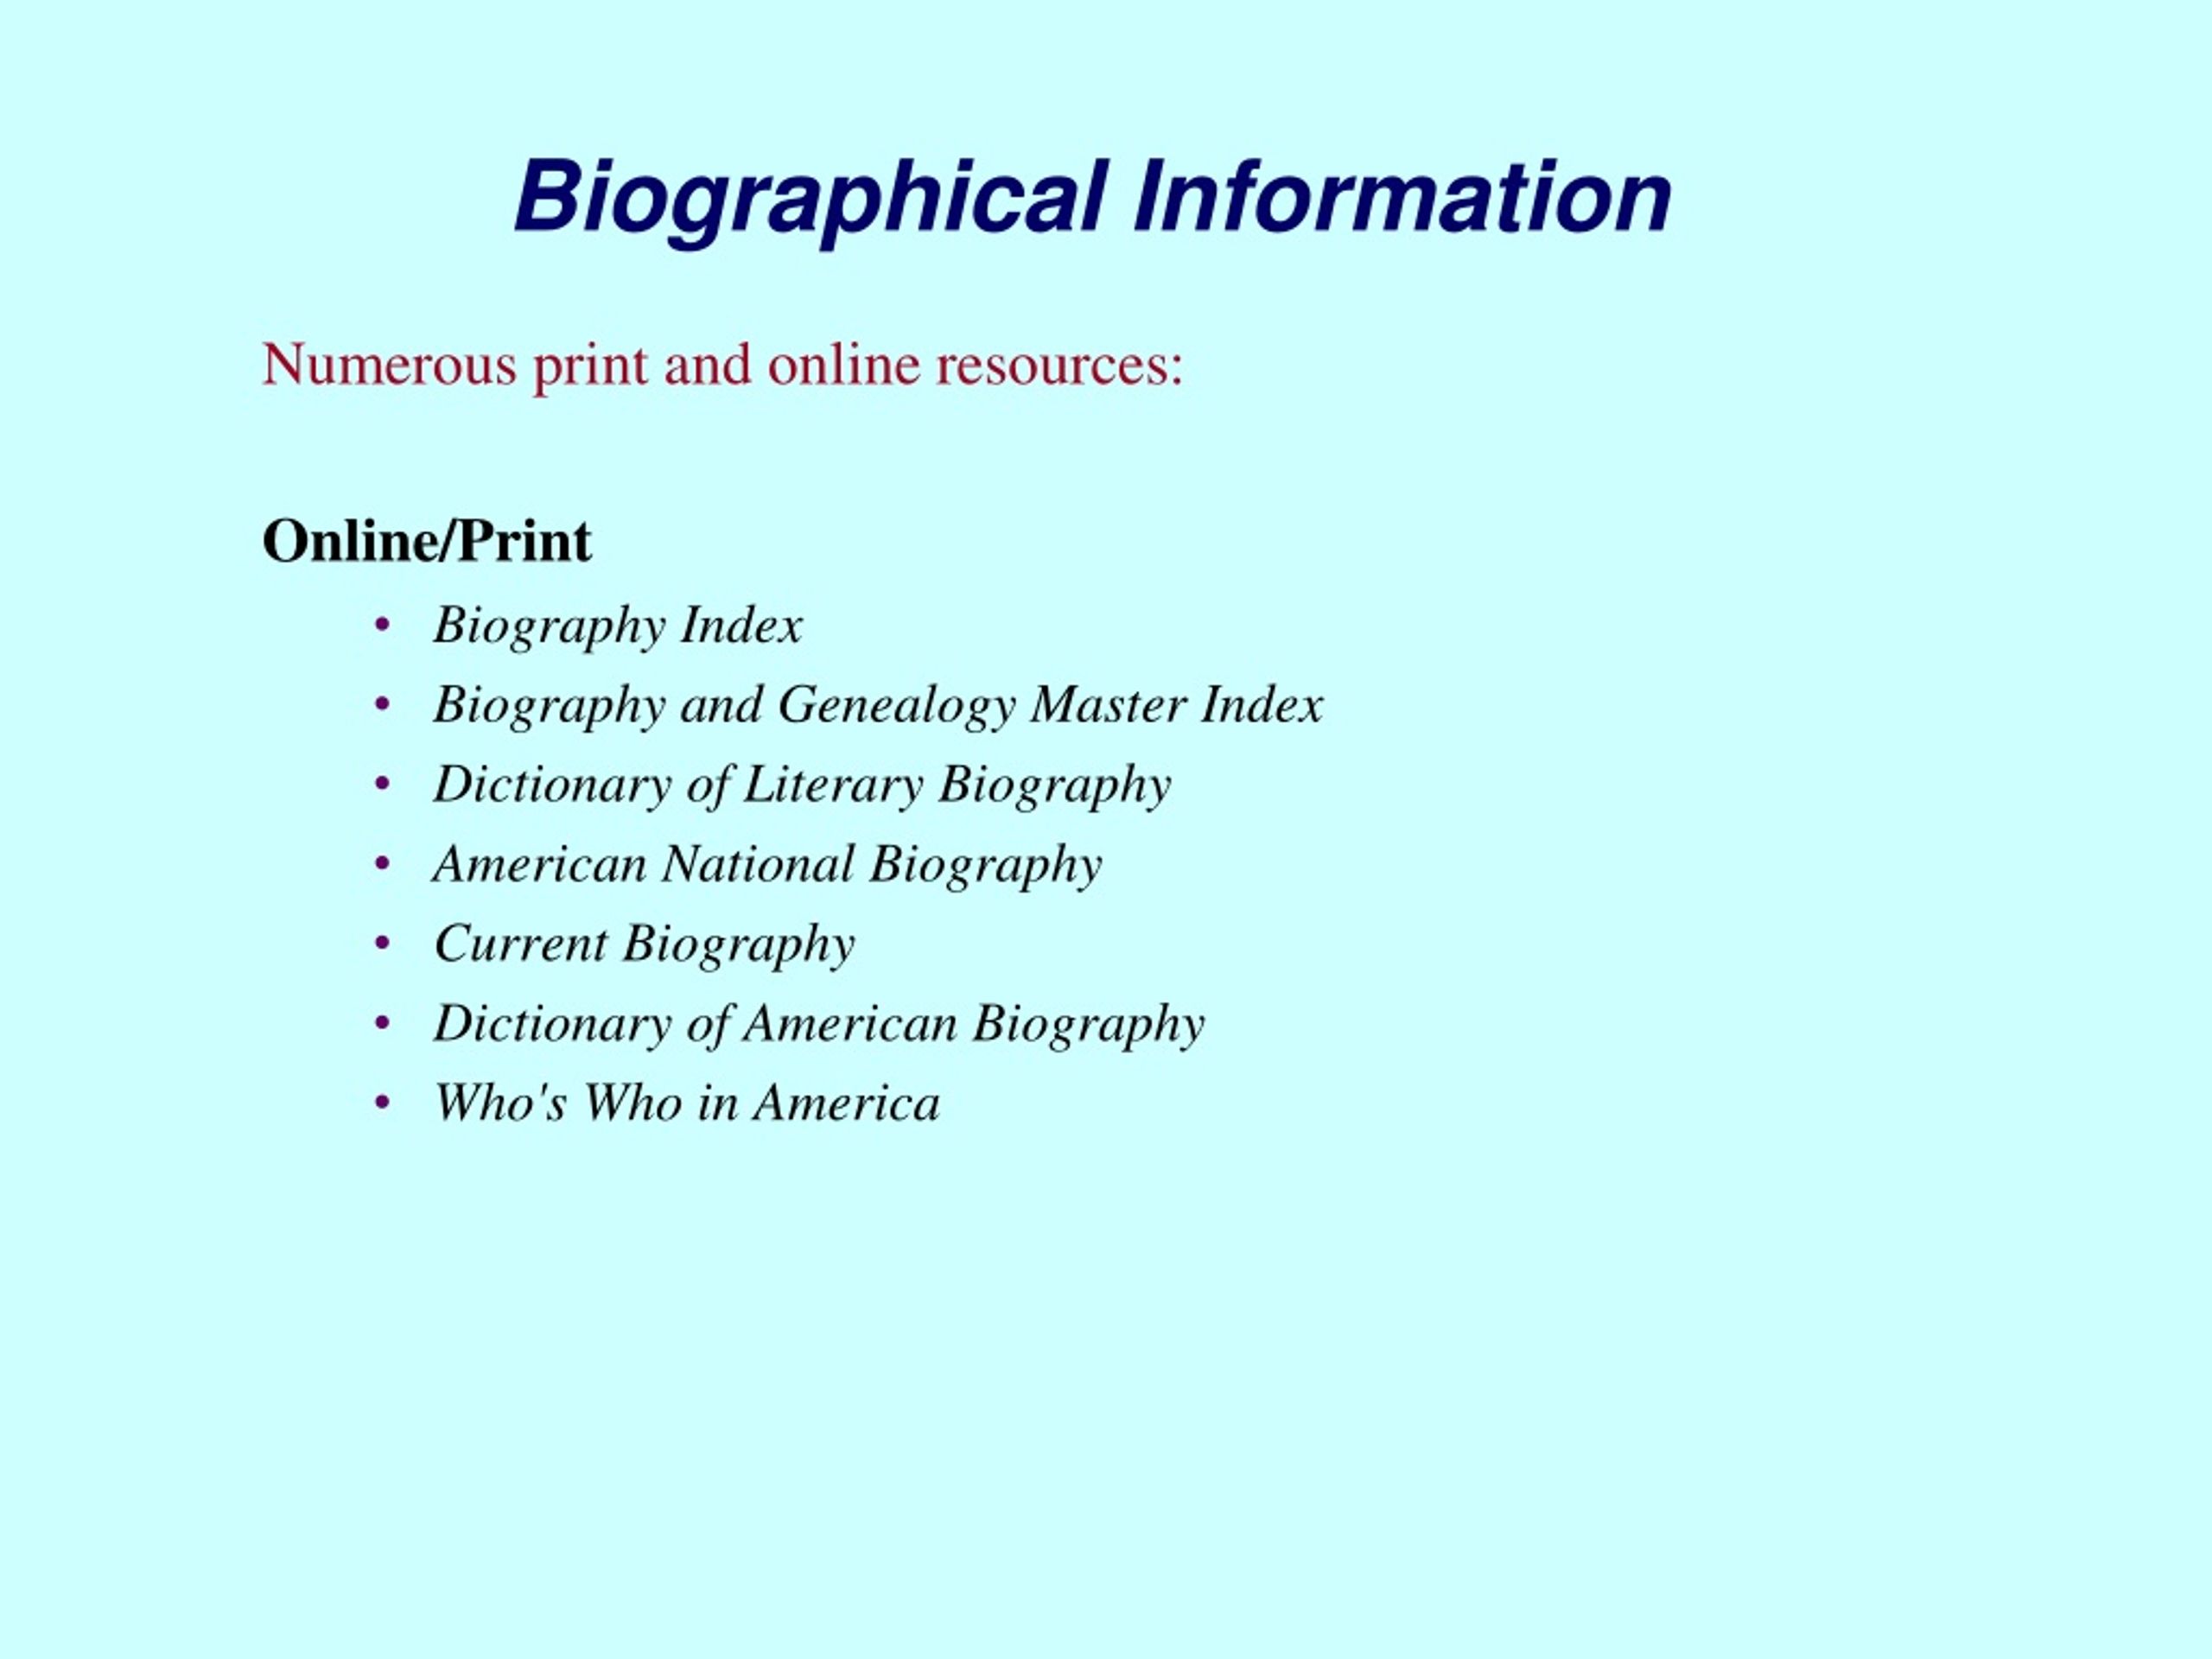 what sources of information is biography